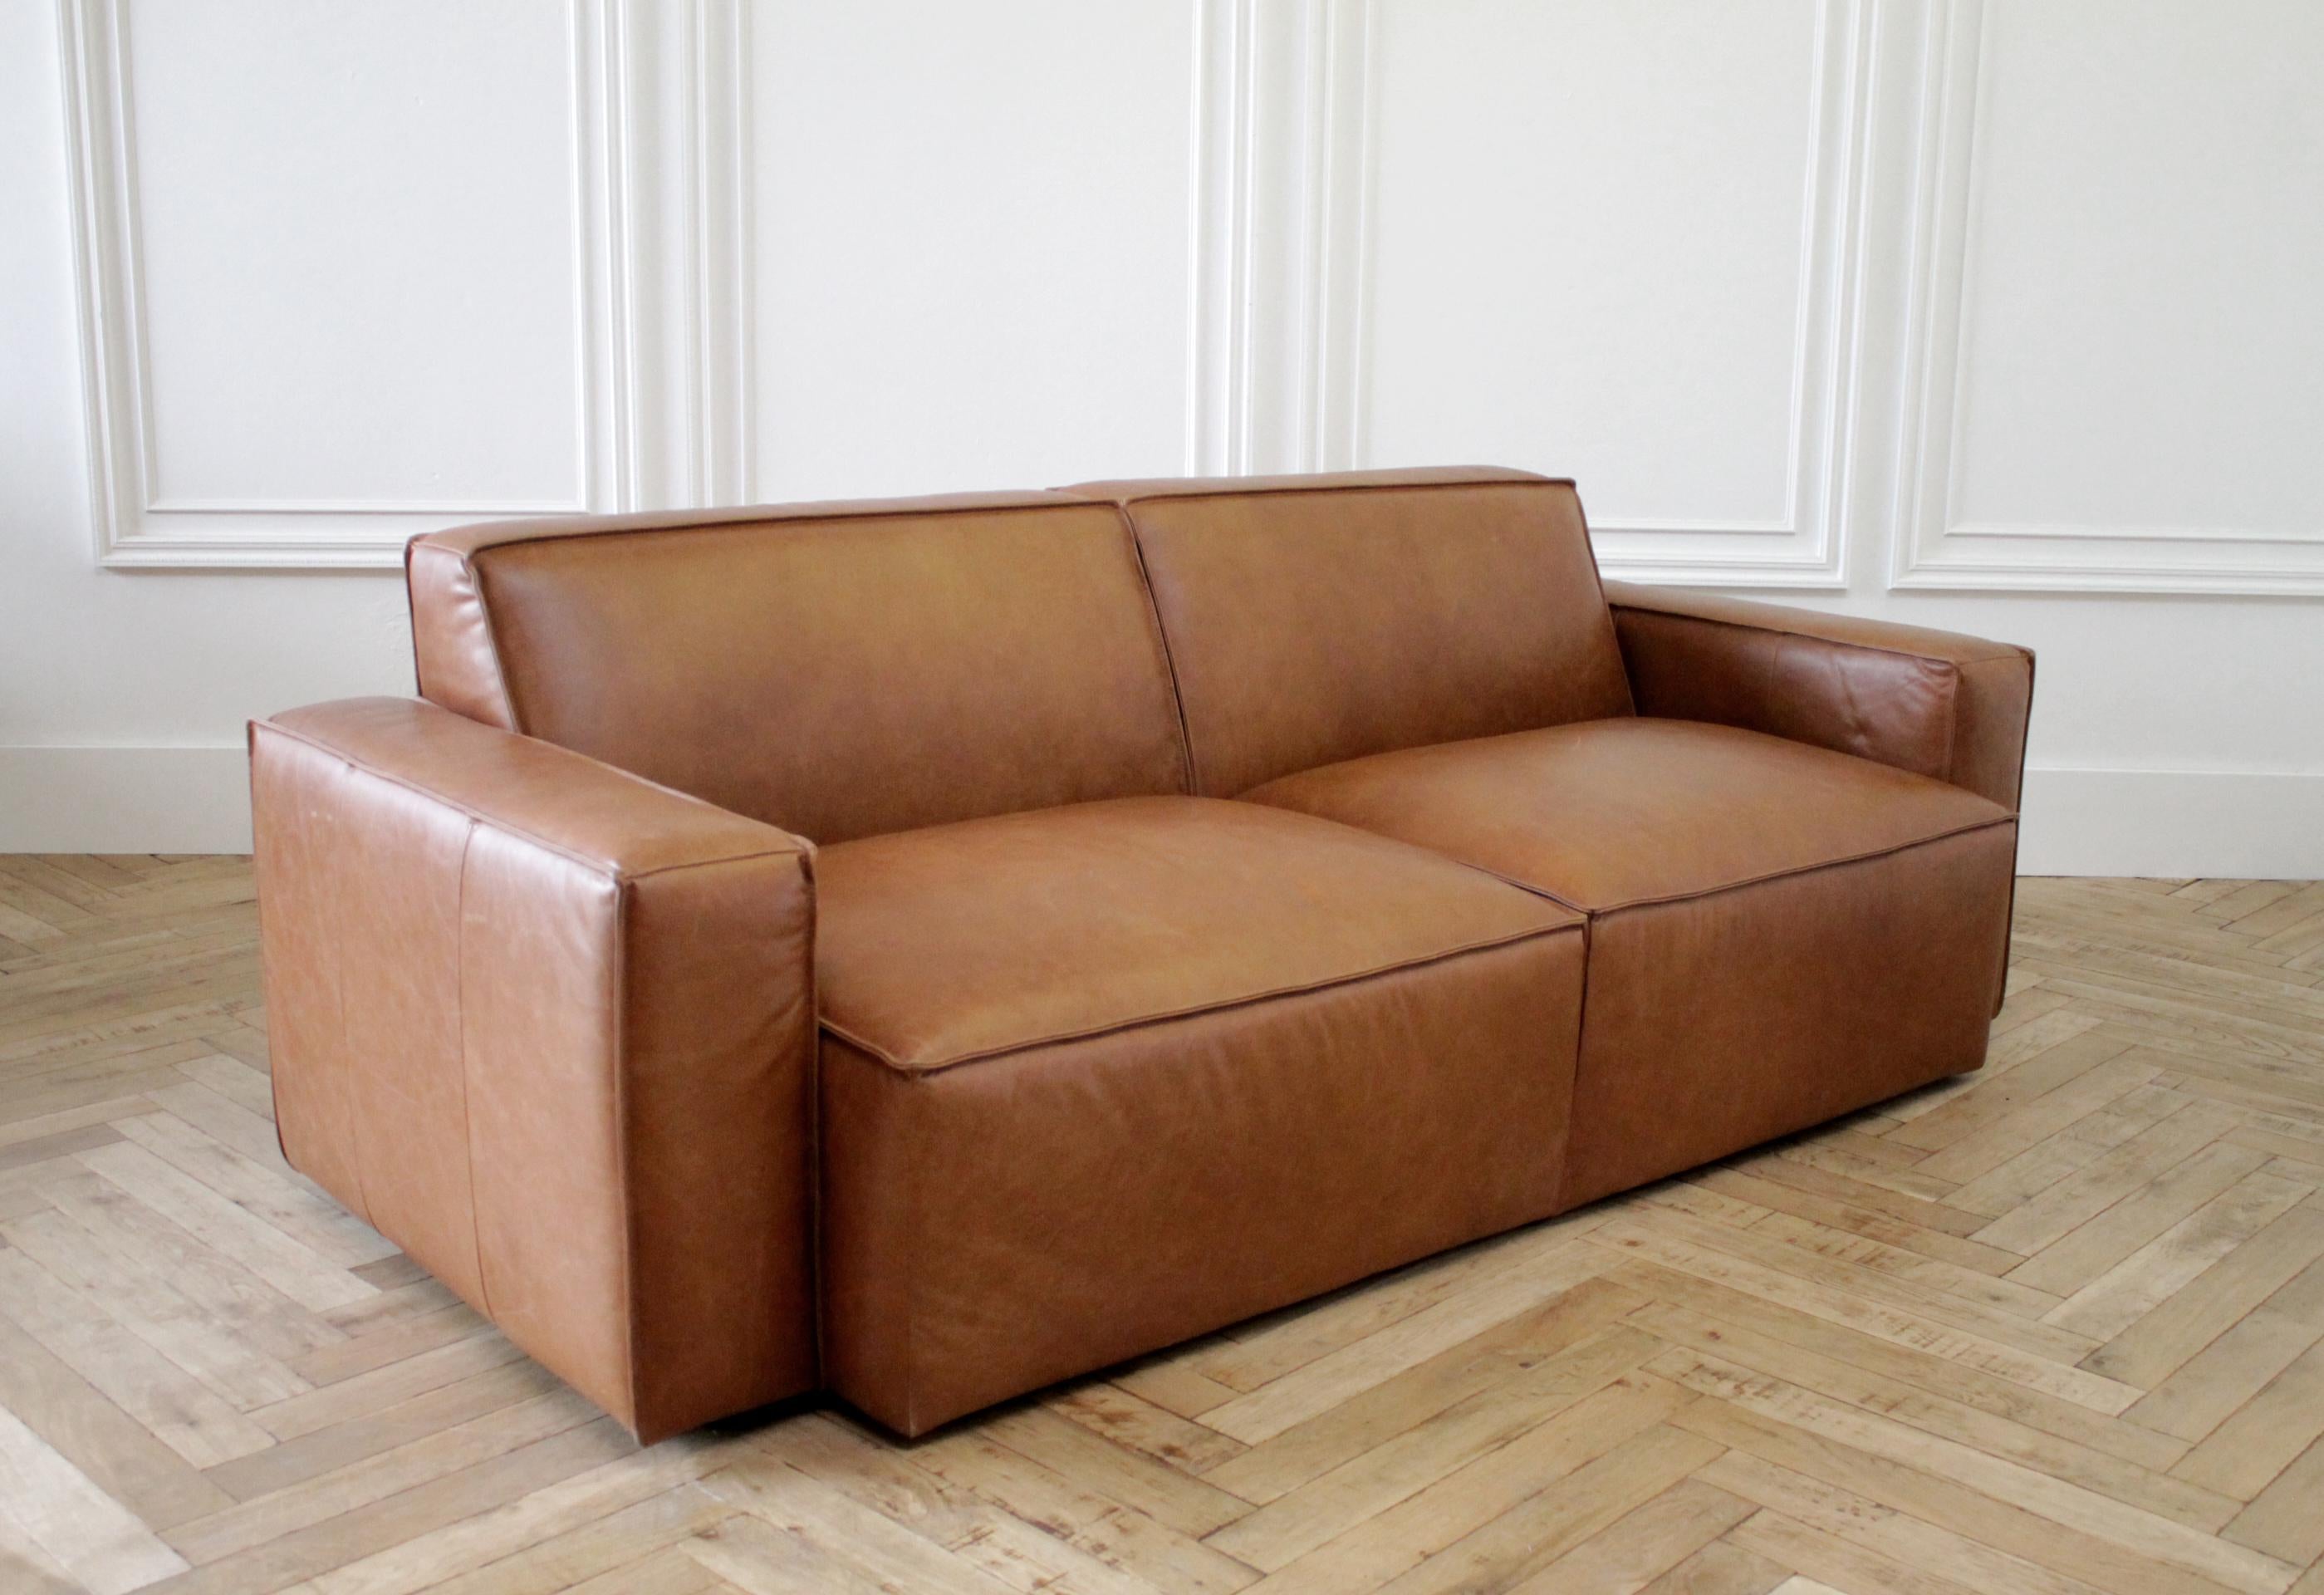 American Brown Leather Modern Square Sofa 2 Available